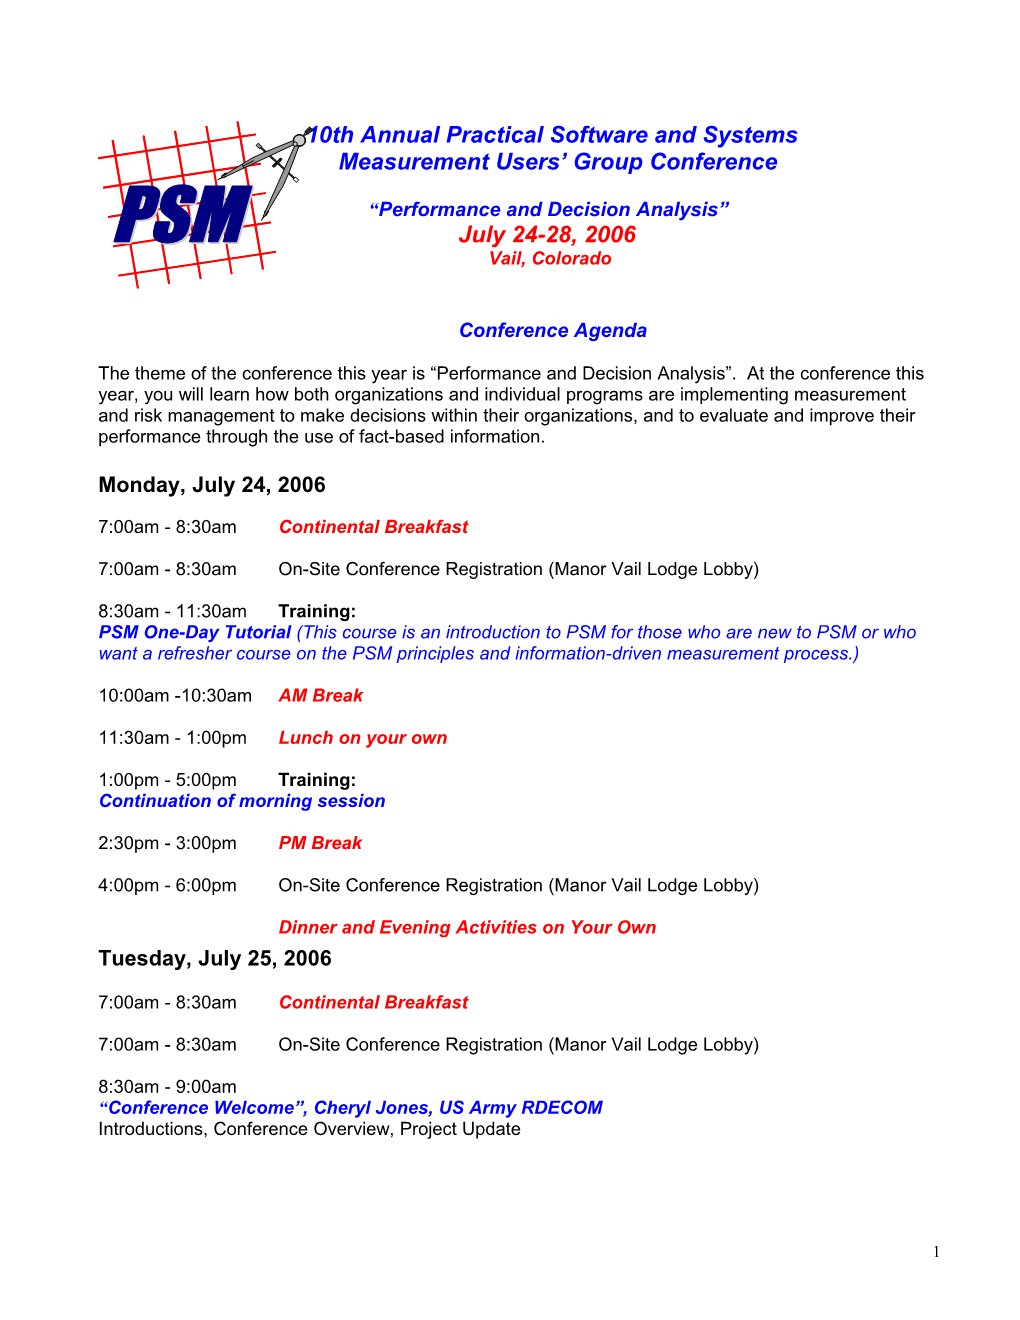 5Th Annual PSM USERS GROUP CONFERENCE